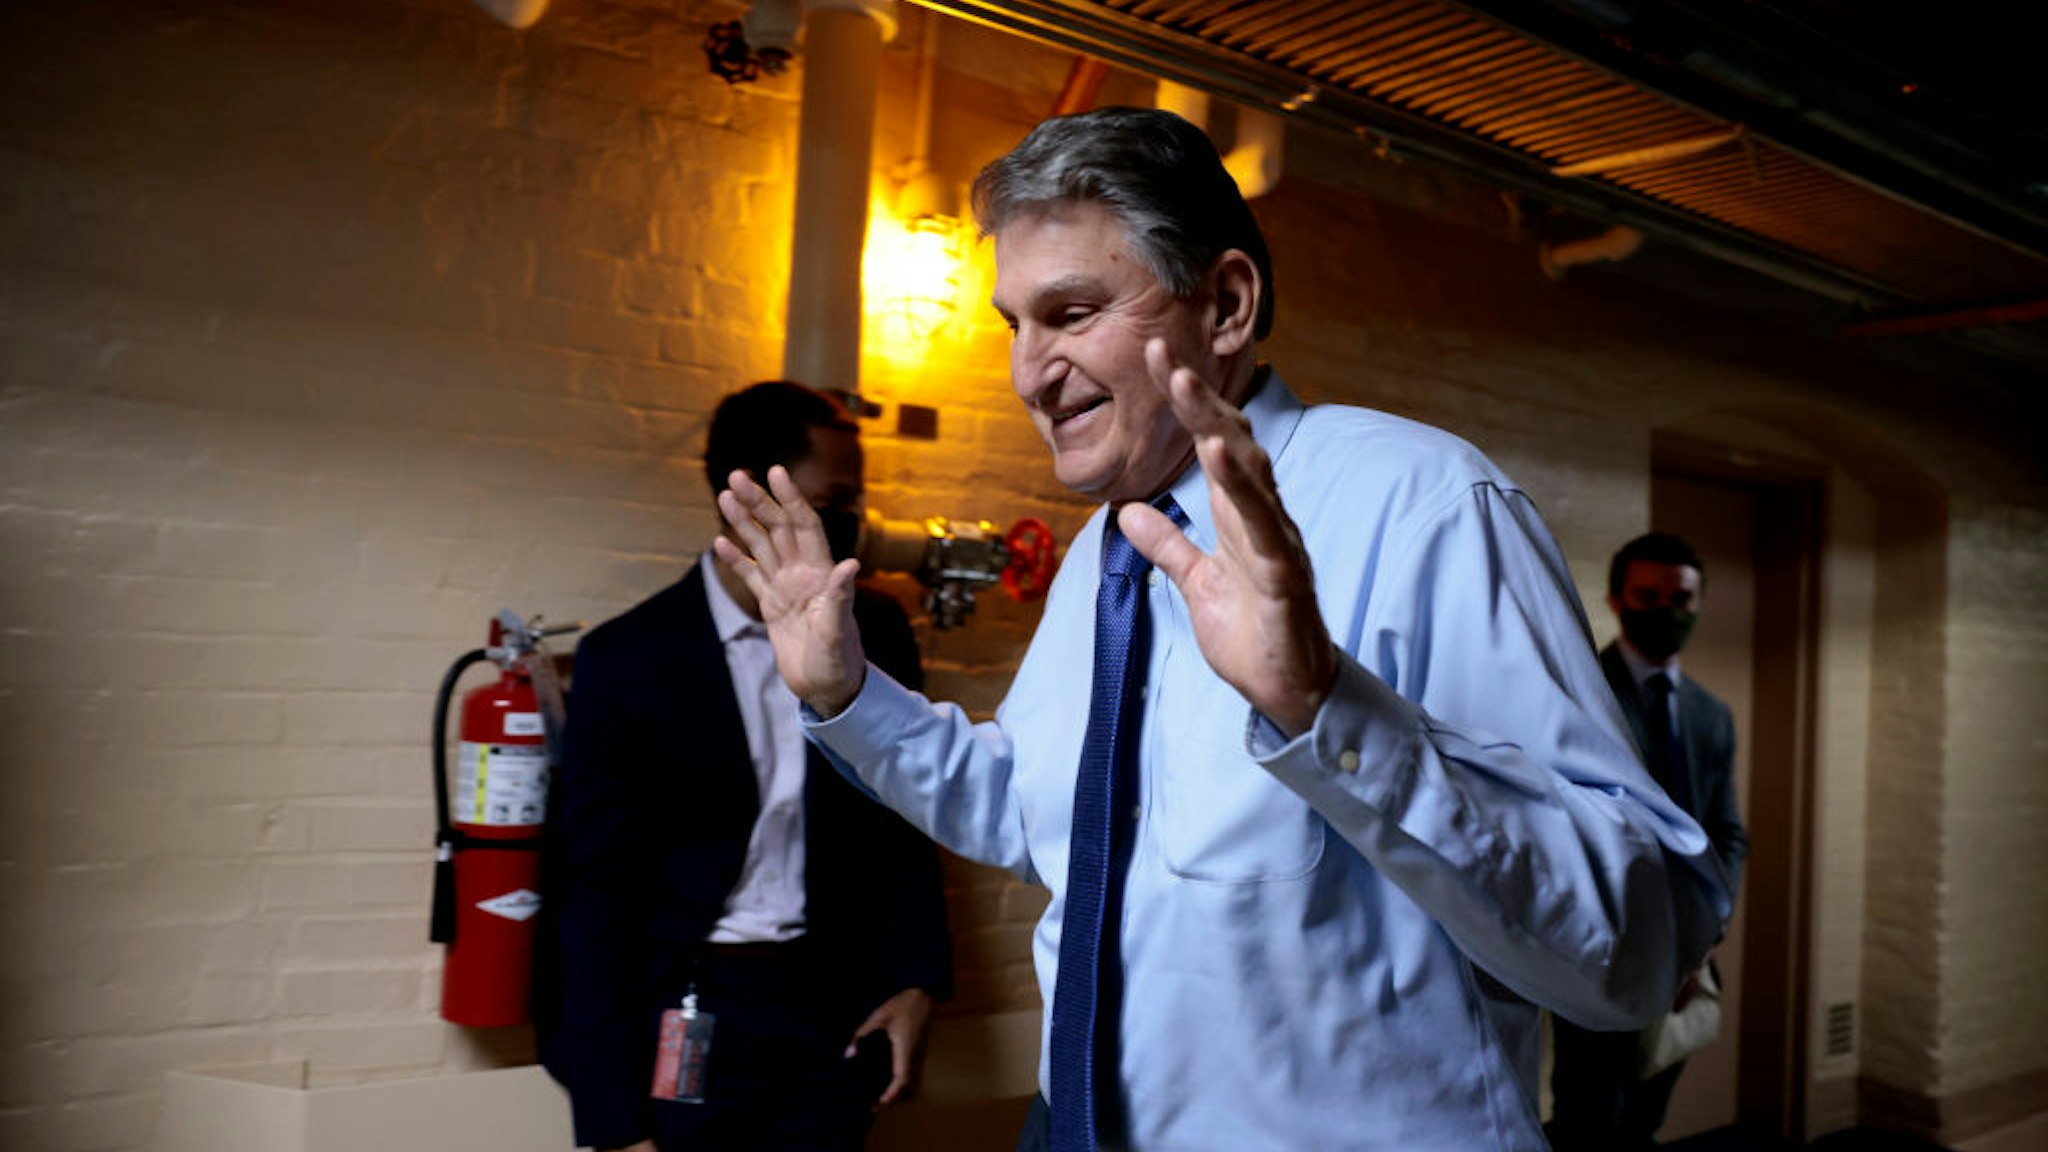 WASHINGTON, DC - DECEMBER 15: Sen. Joe Manchin (D-WV) walks out of a meeting with fellow Democratic senators for a break in the basement of the U.S. Capitol Building on December 15, 2021 in Washington, DC. The senators held the meeting to discuss senate rules with their staff members. (Photo by Anna Moneymaker/Getty Images)